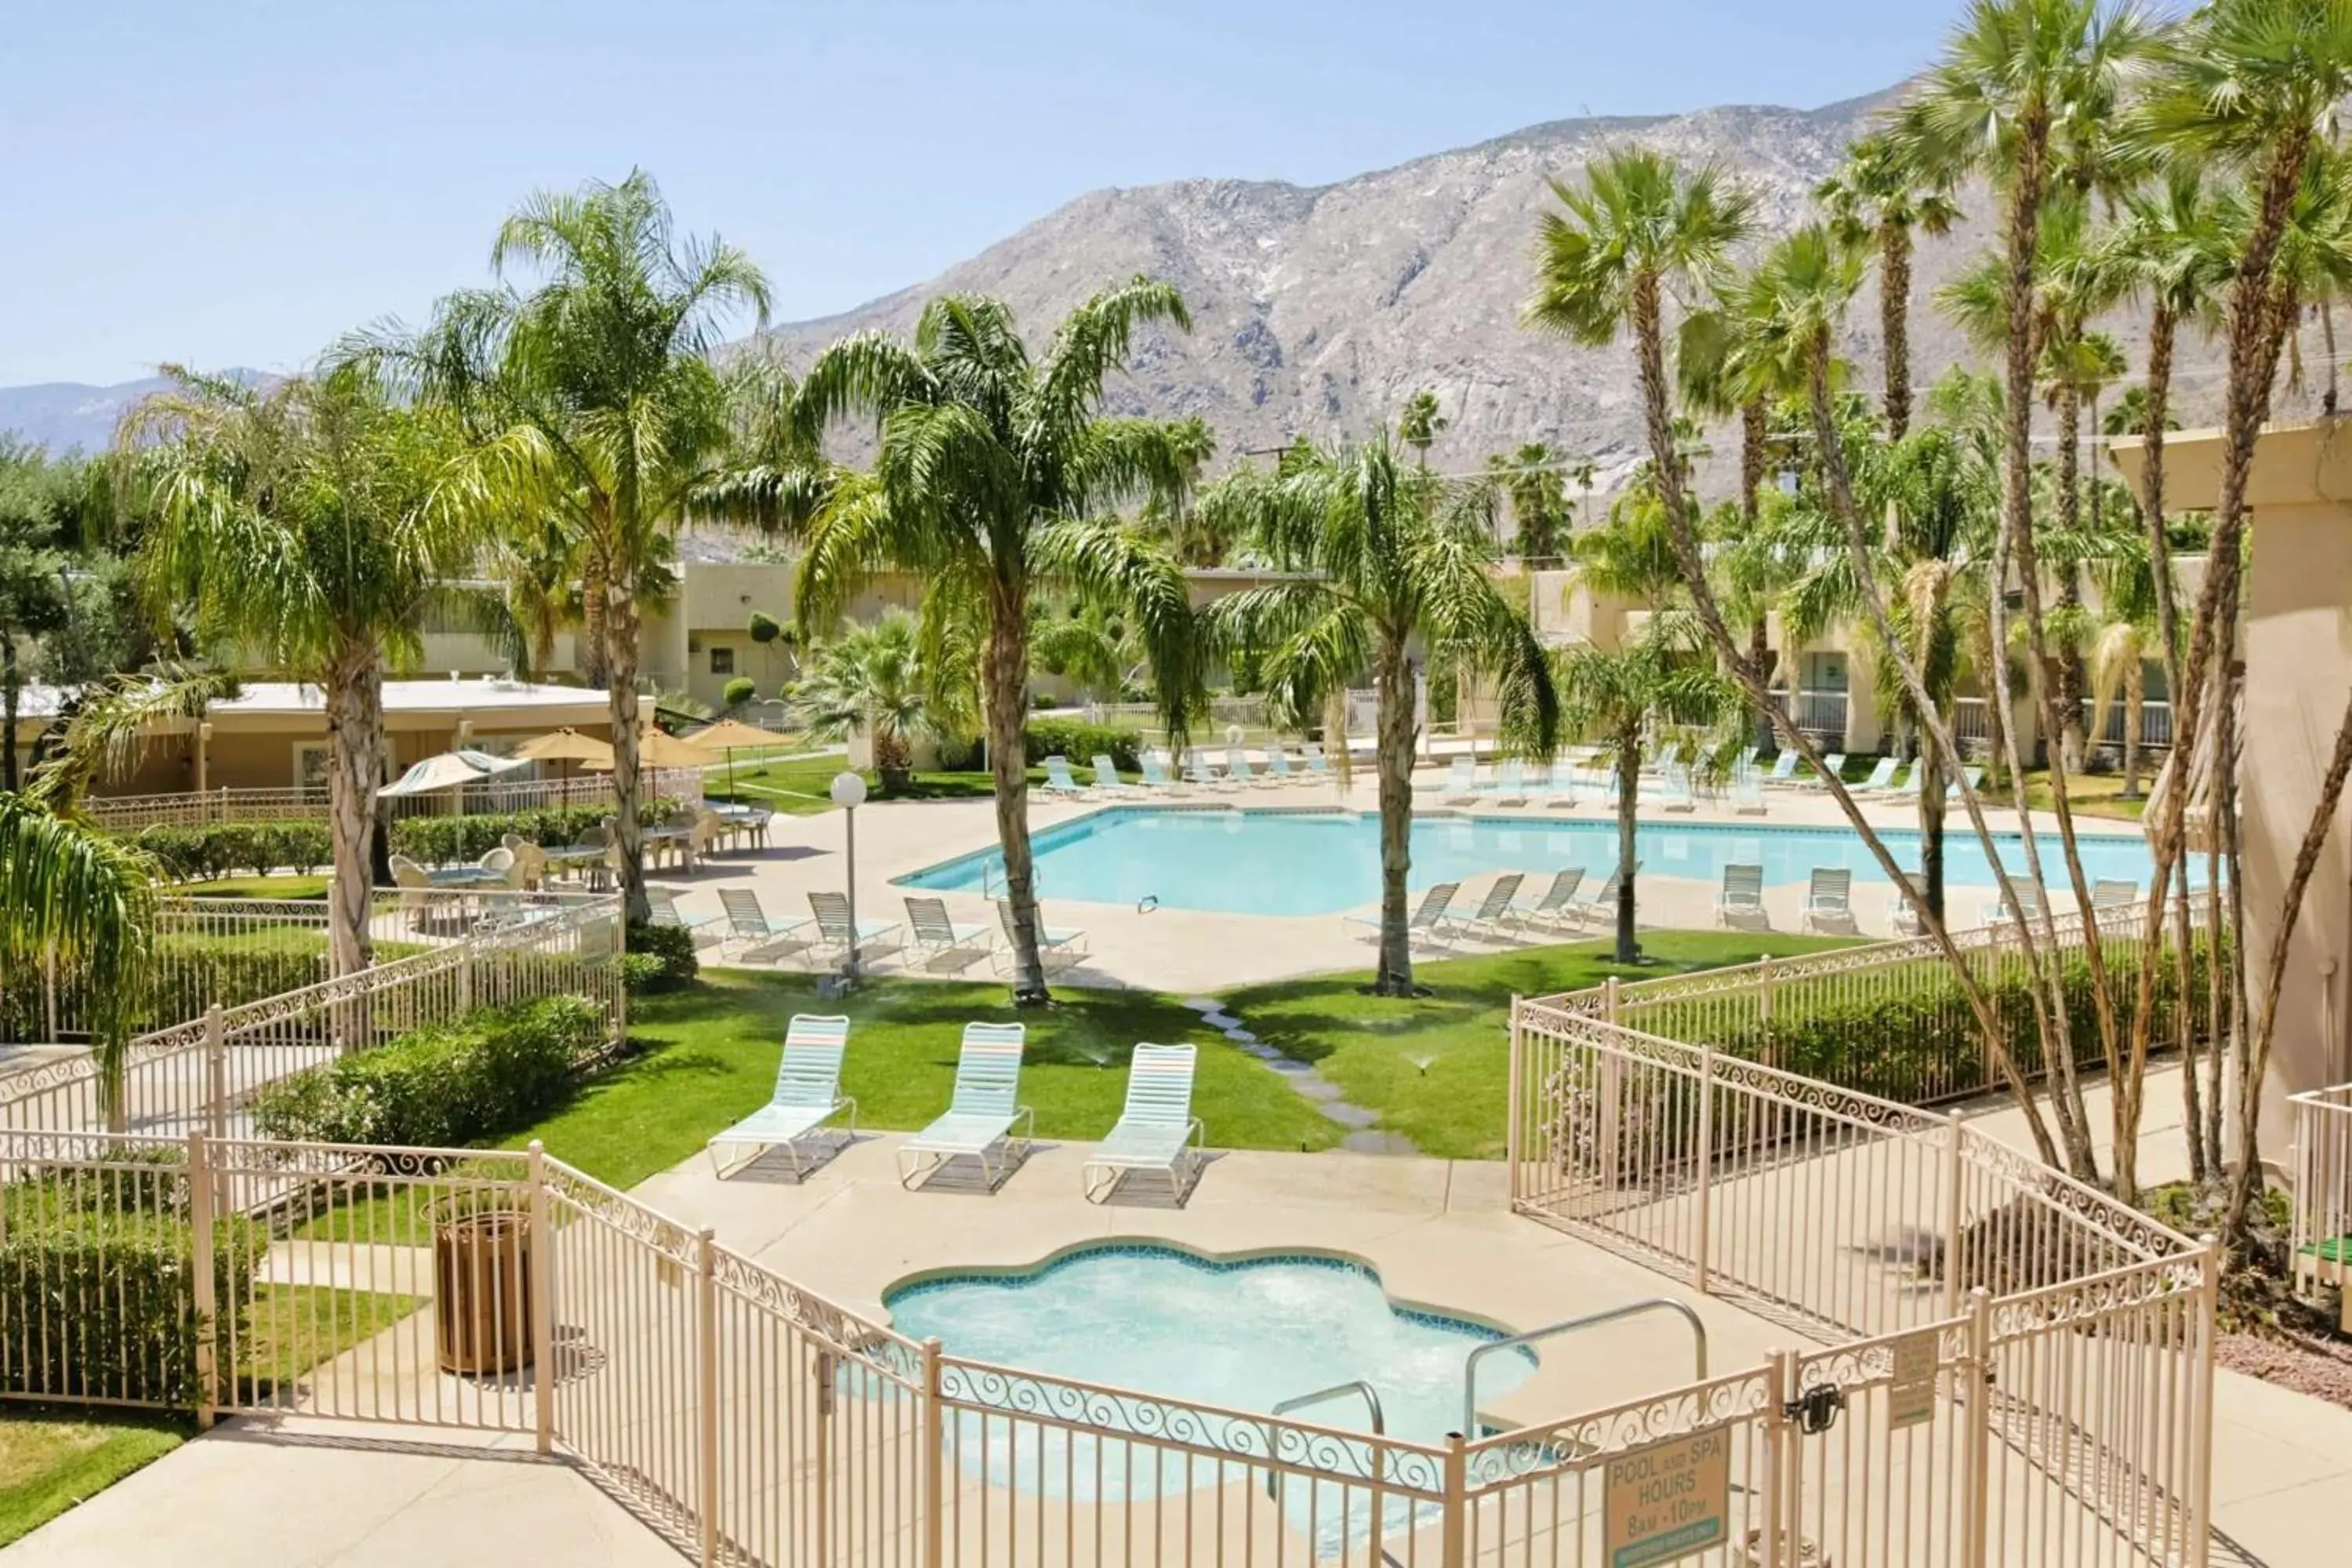 On site, Pool View in Days Inn by Wyndham Palm Springs